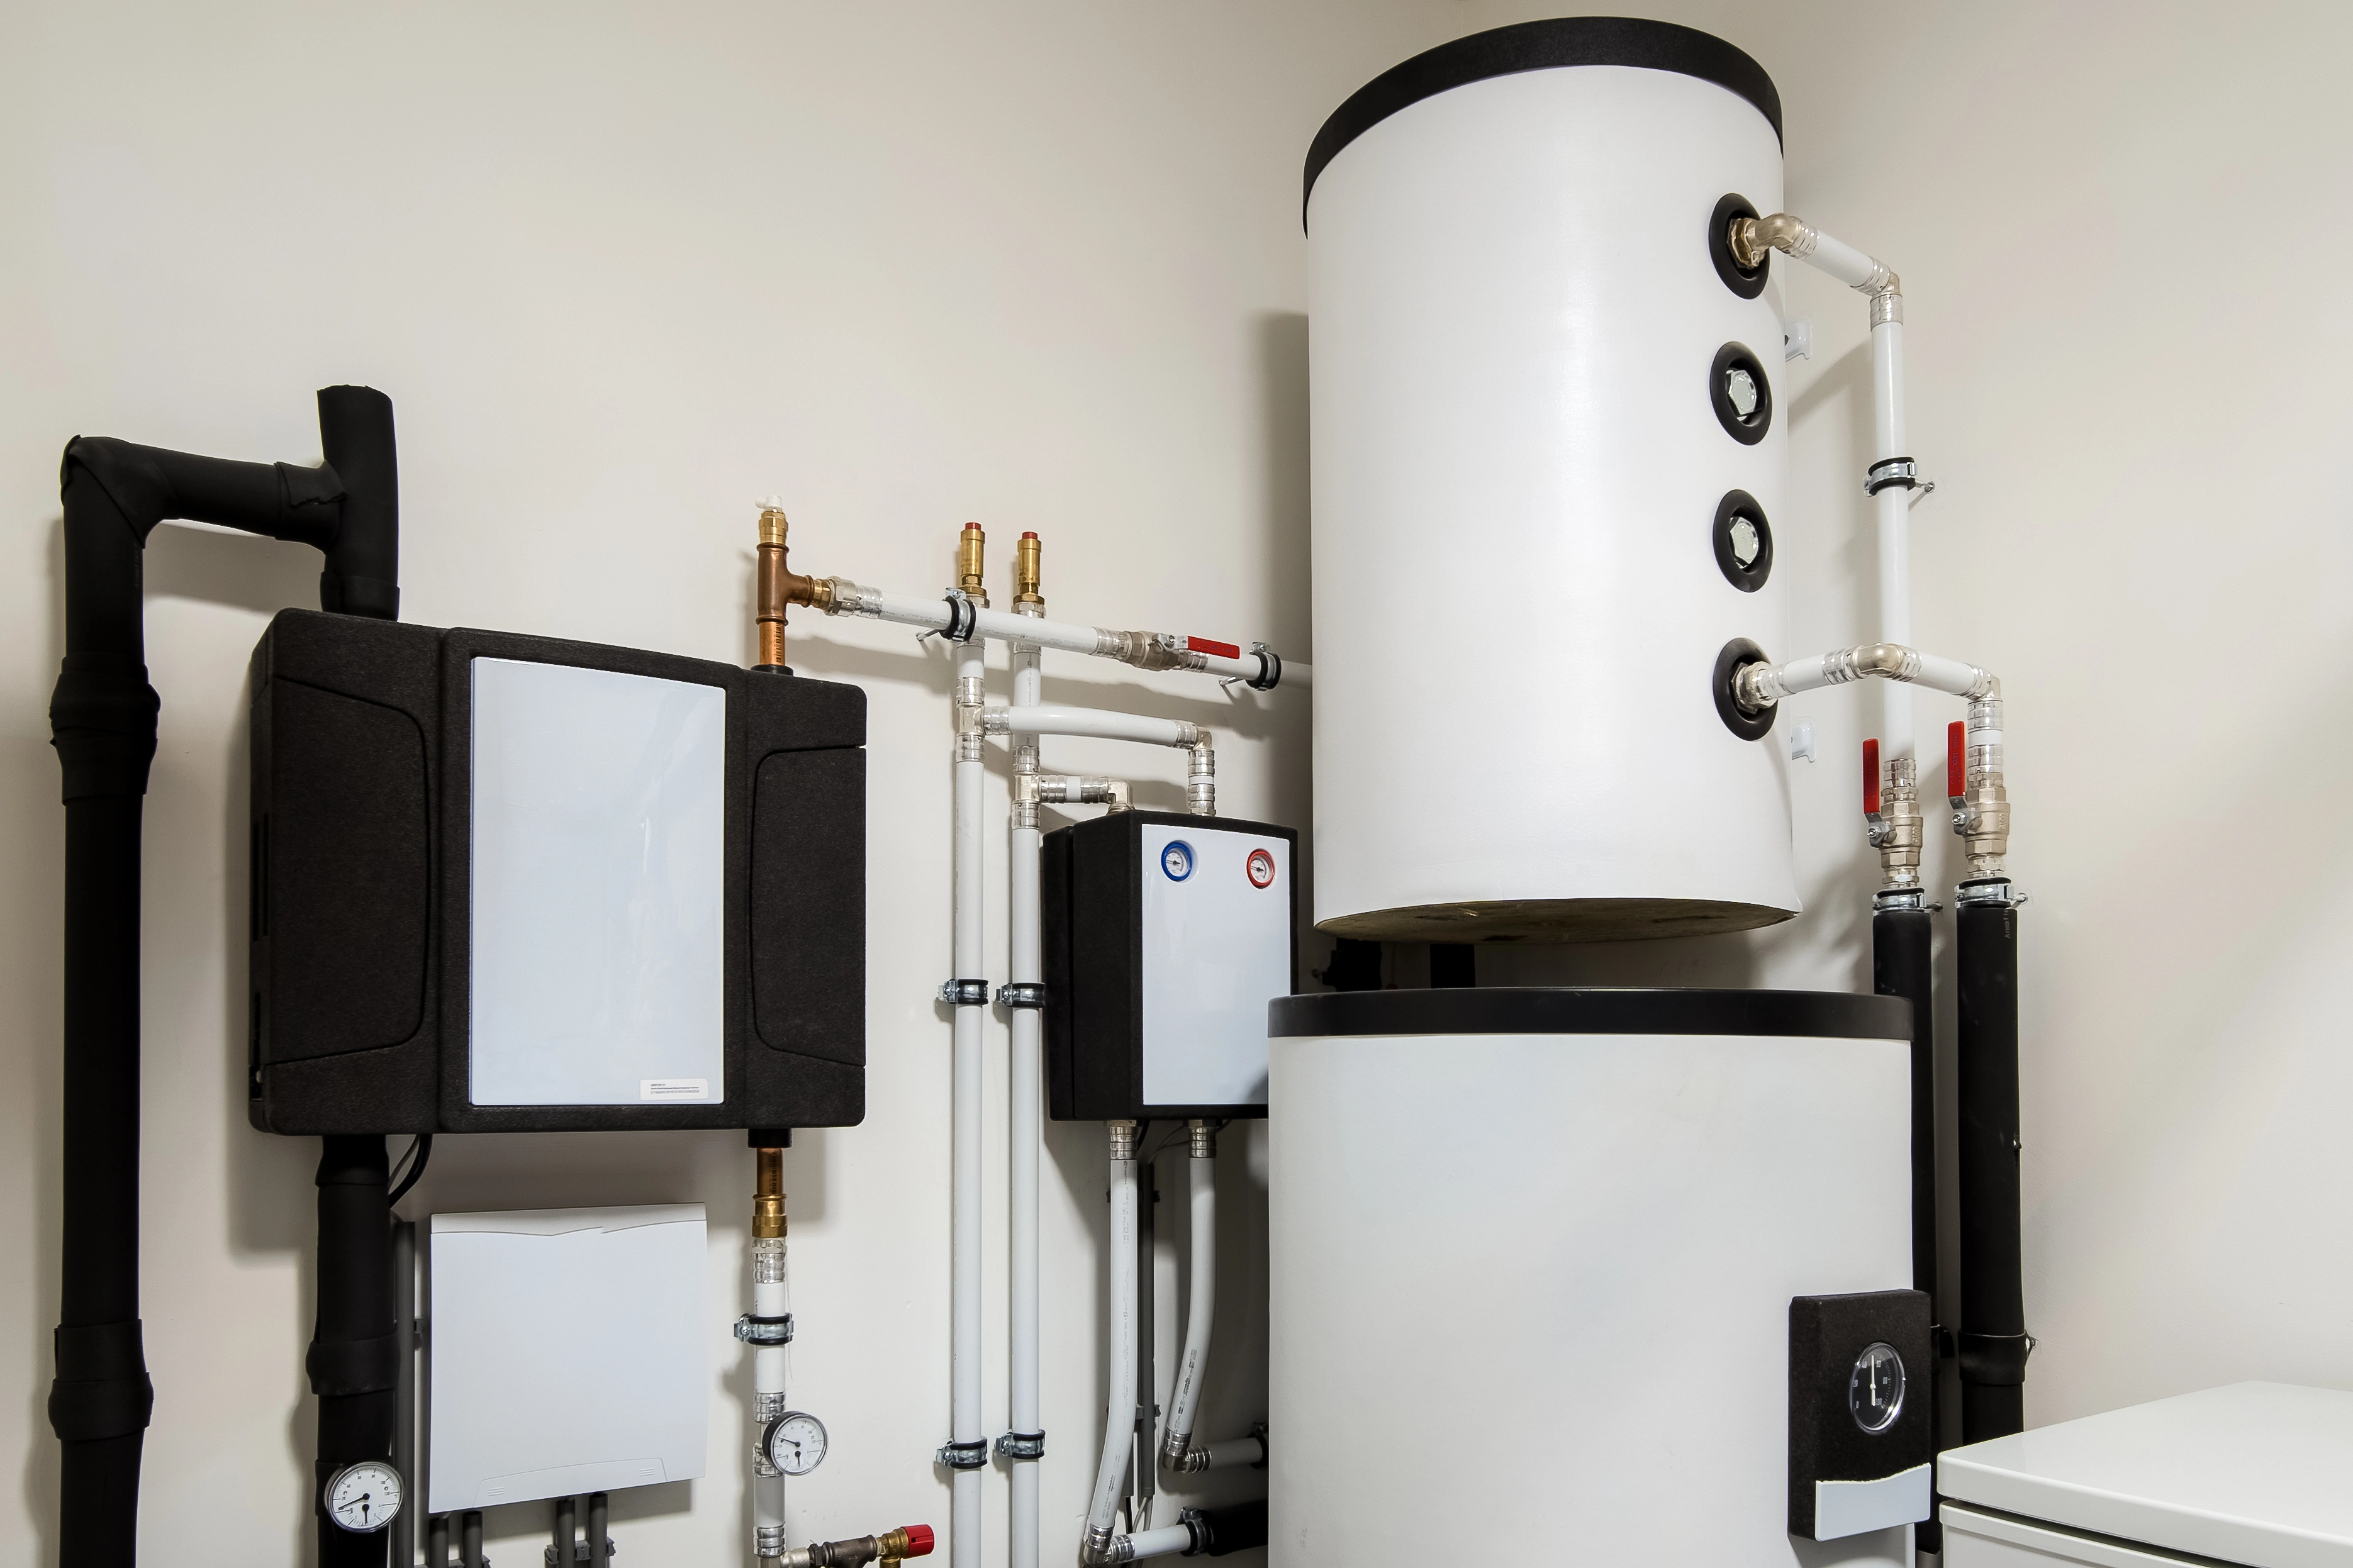 Hydronics & domestic hot water systems